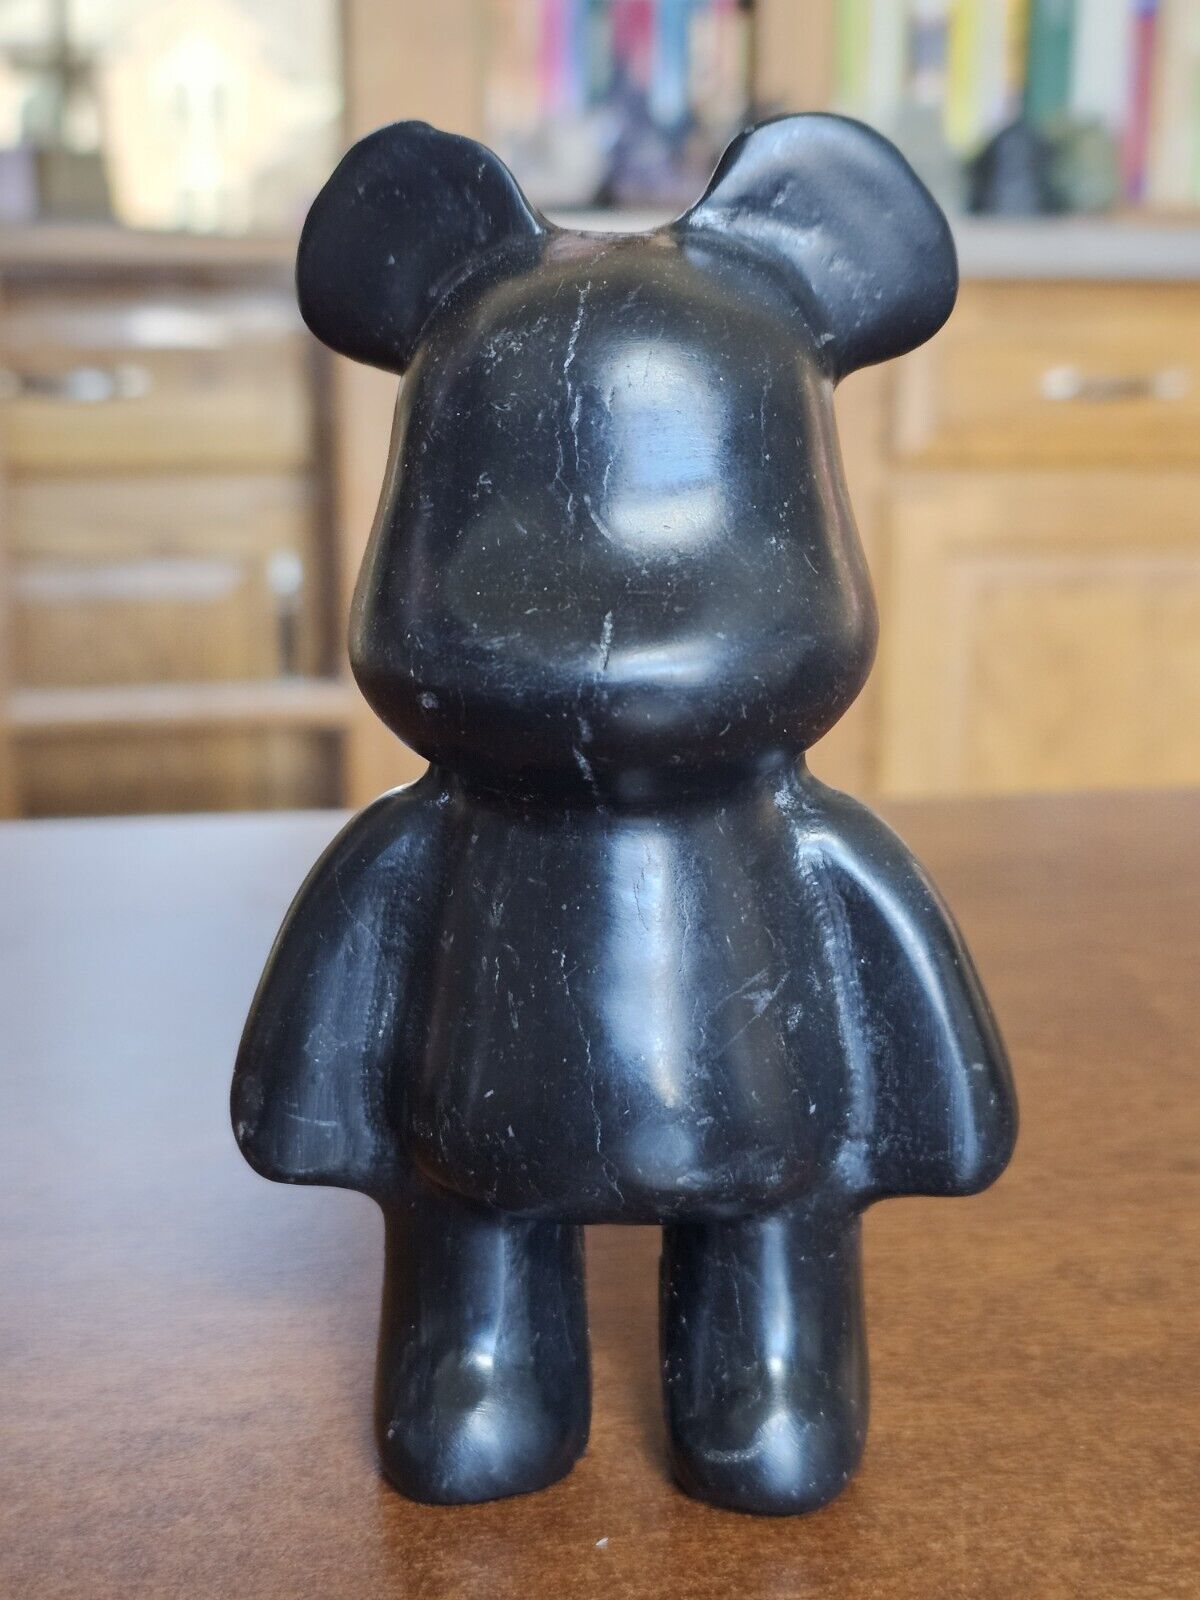 Large Black Jade Bearbrick Crystal Carving - 654 grams - Rare Find Collectible 